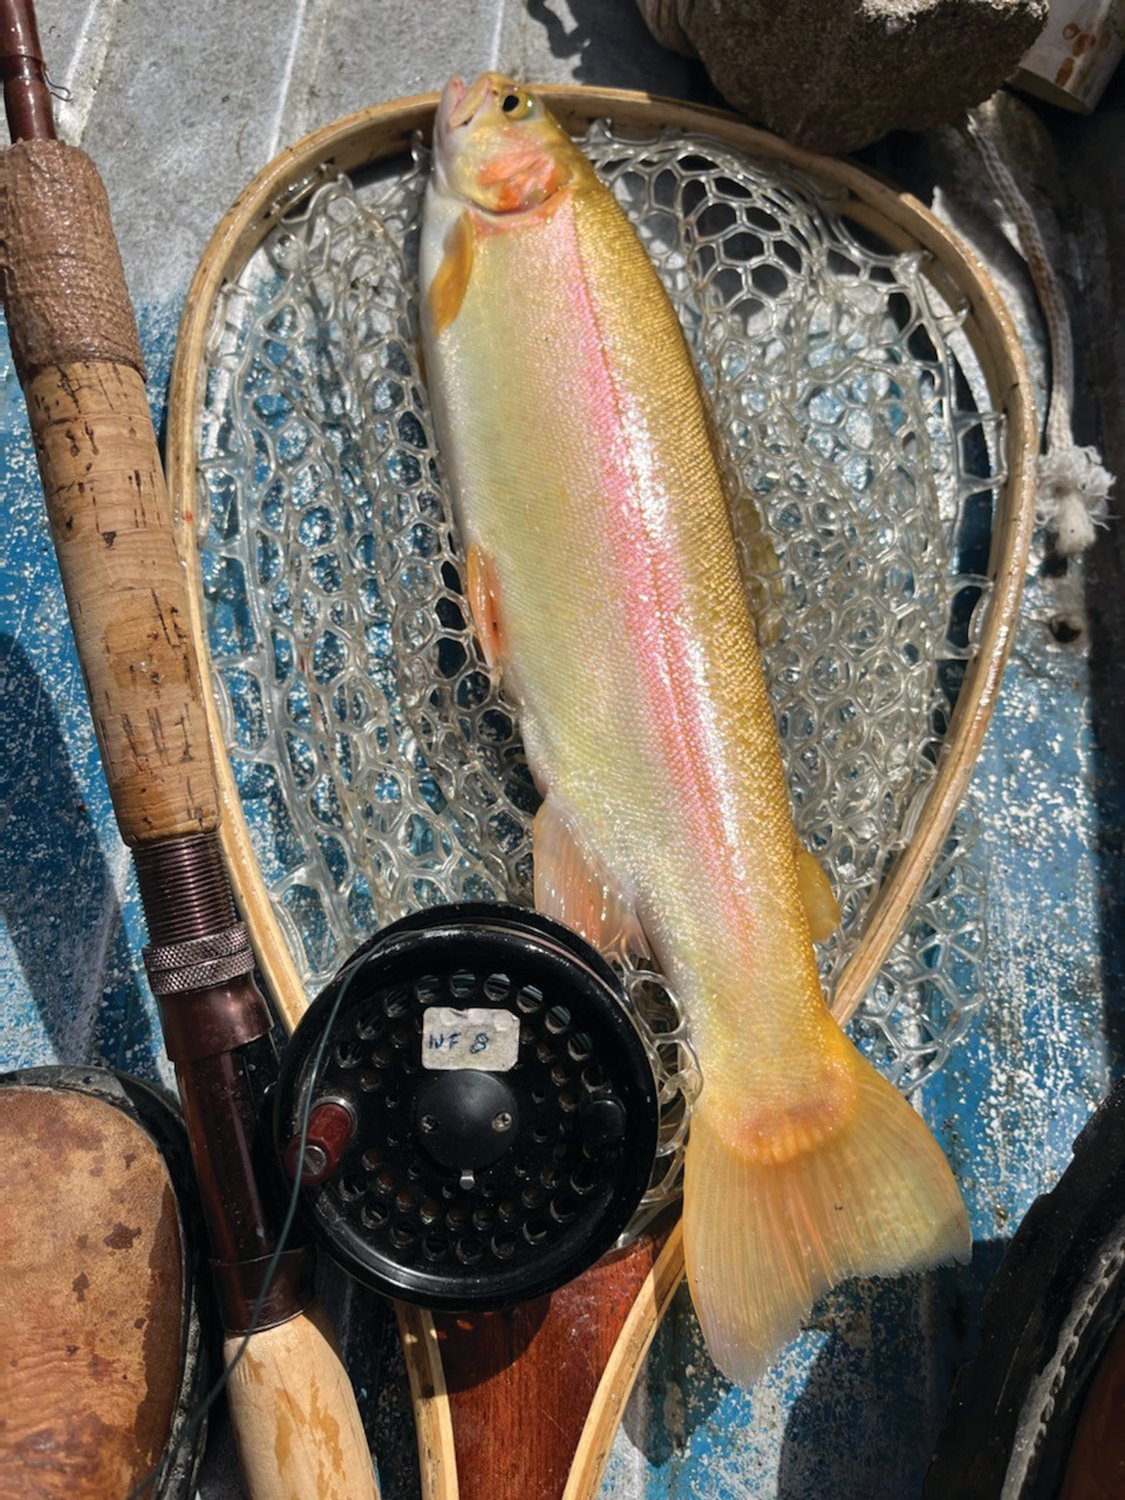 Jeff Spicer of Scituate, RI landed this golden trout with his fly rod when fishing Opening Day.